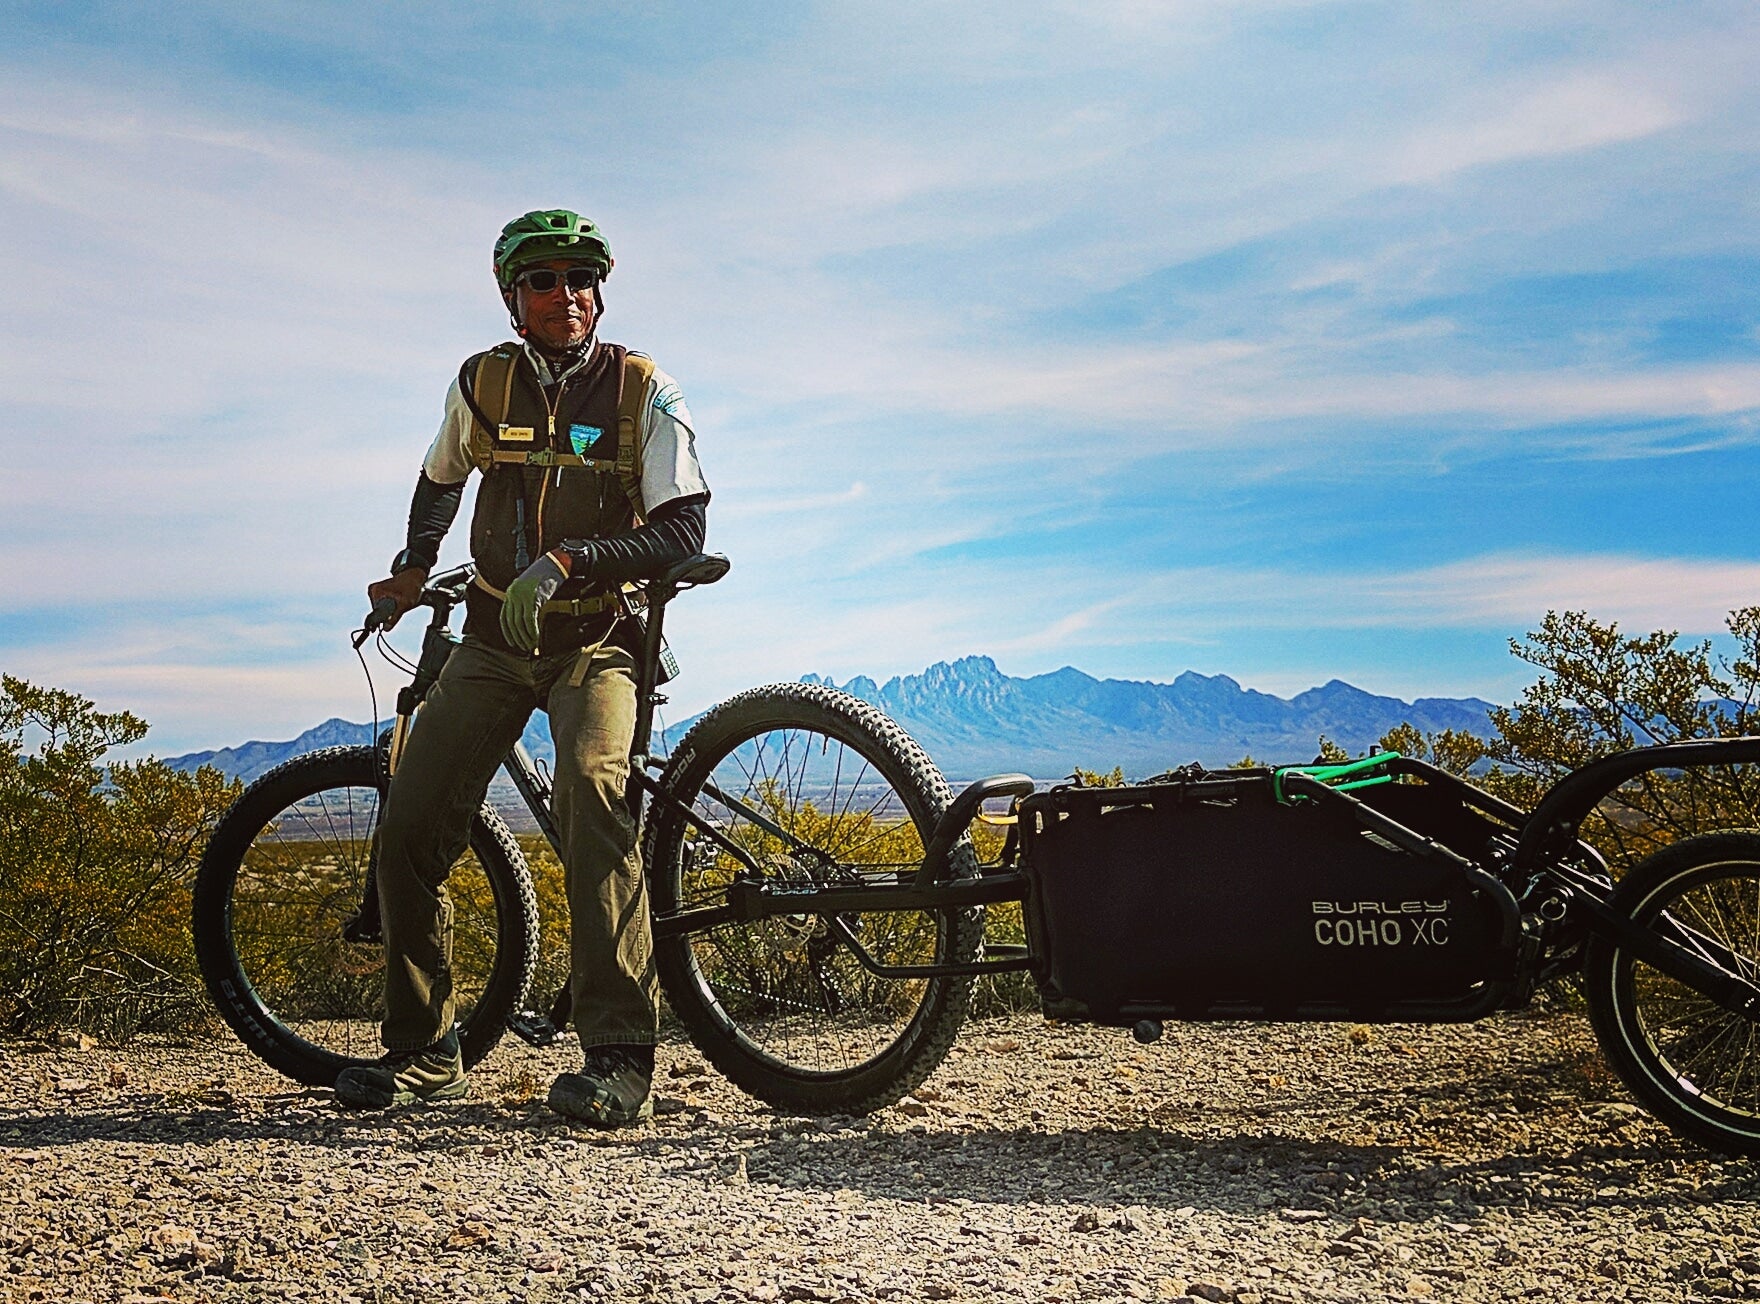 man leaning against bicycle with cargo bike trailer attached on a dirt path. blue sky and clouds in background